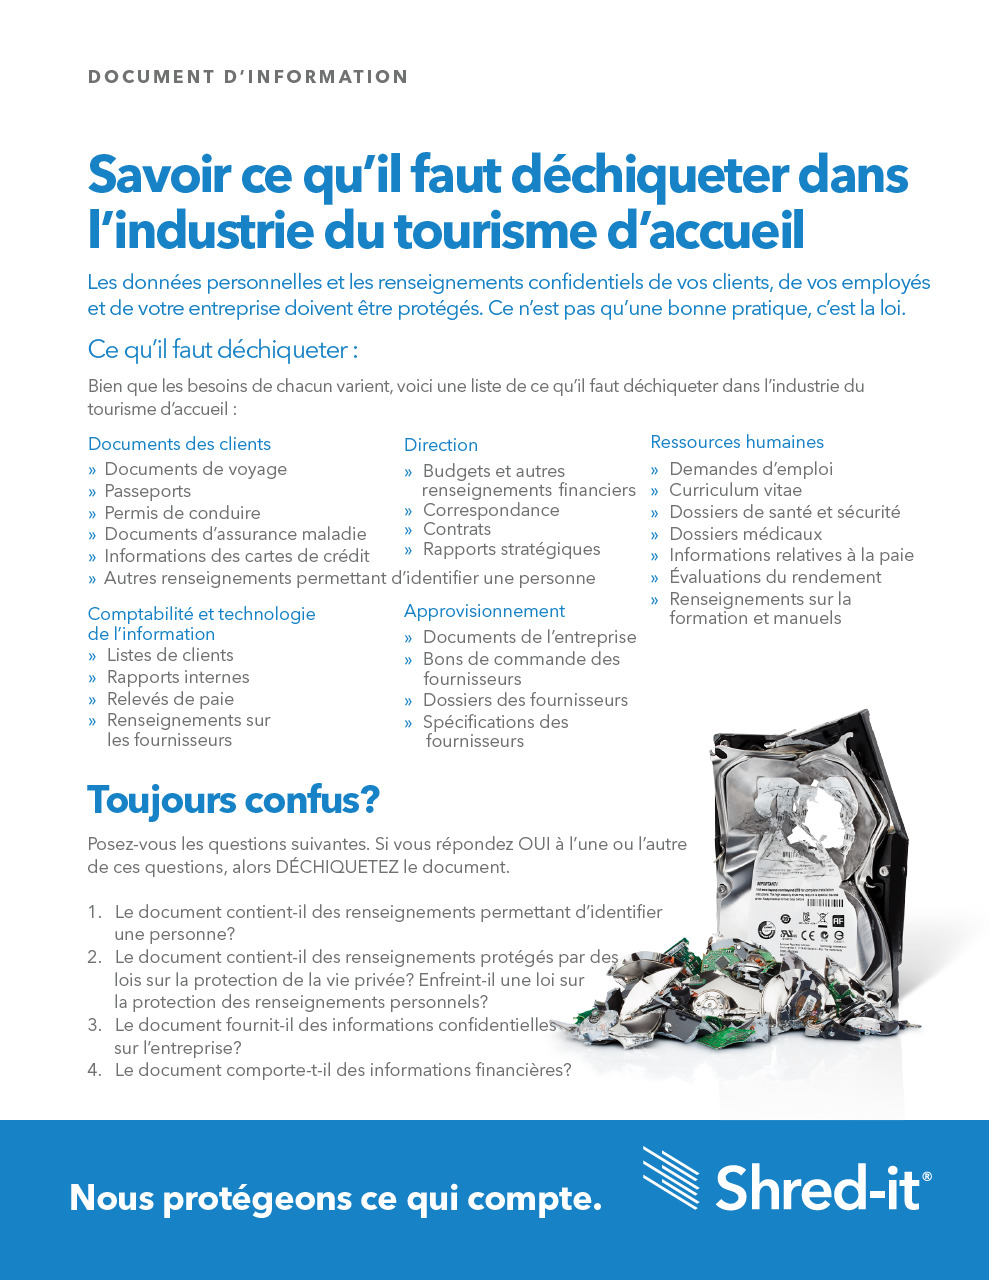 Shred-it-Knowing-What-to-Shred-Hospitality-French.pdf